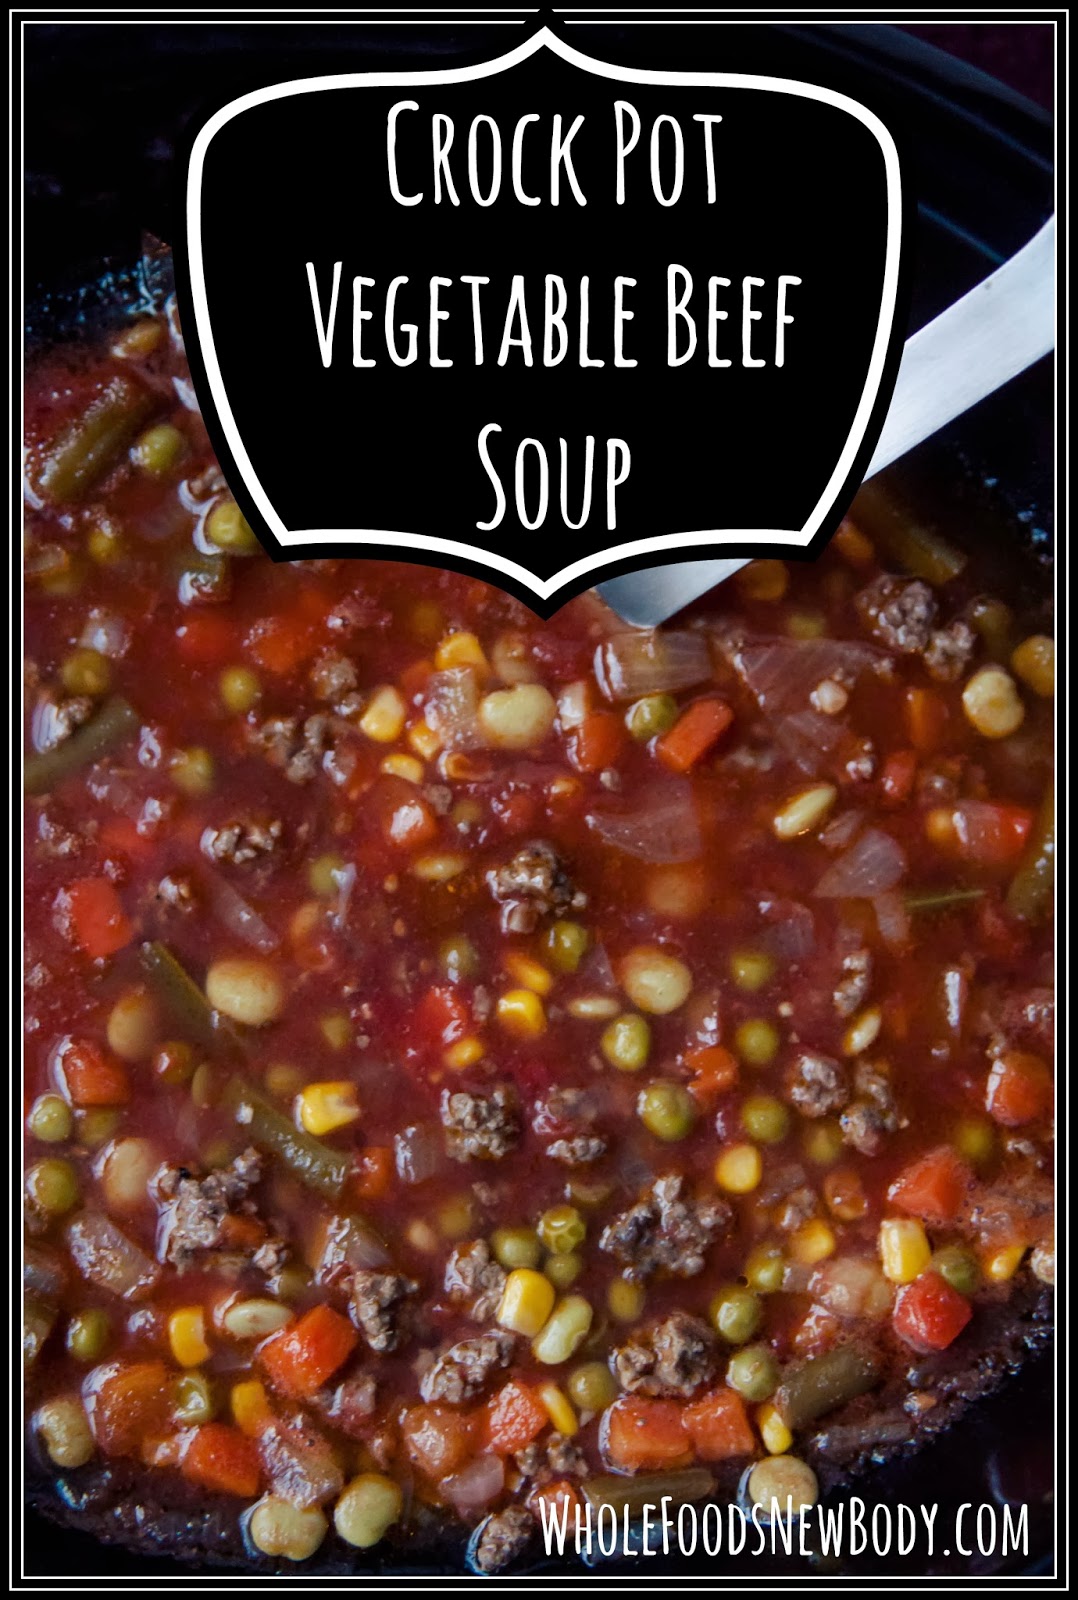 Whole Foods New Body: {Crock Pot Vegetable Beef Soup}